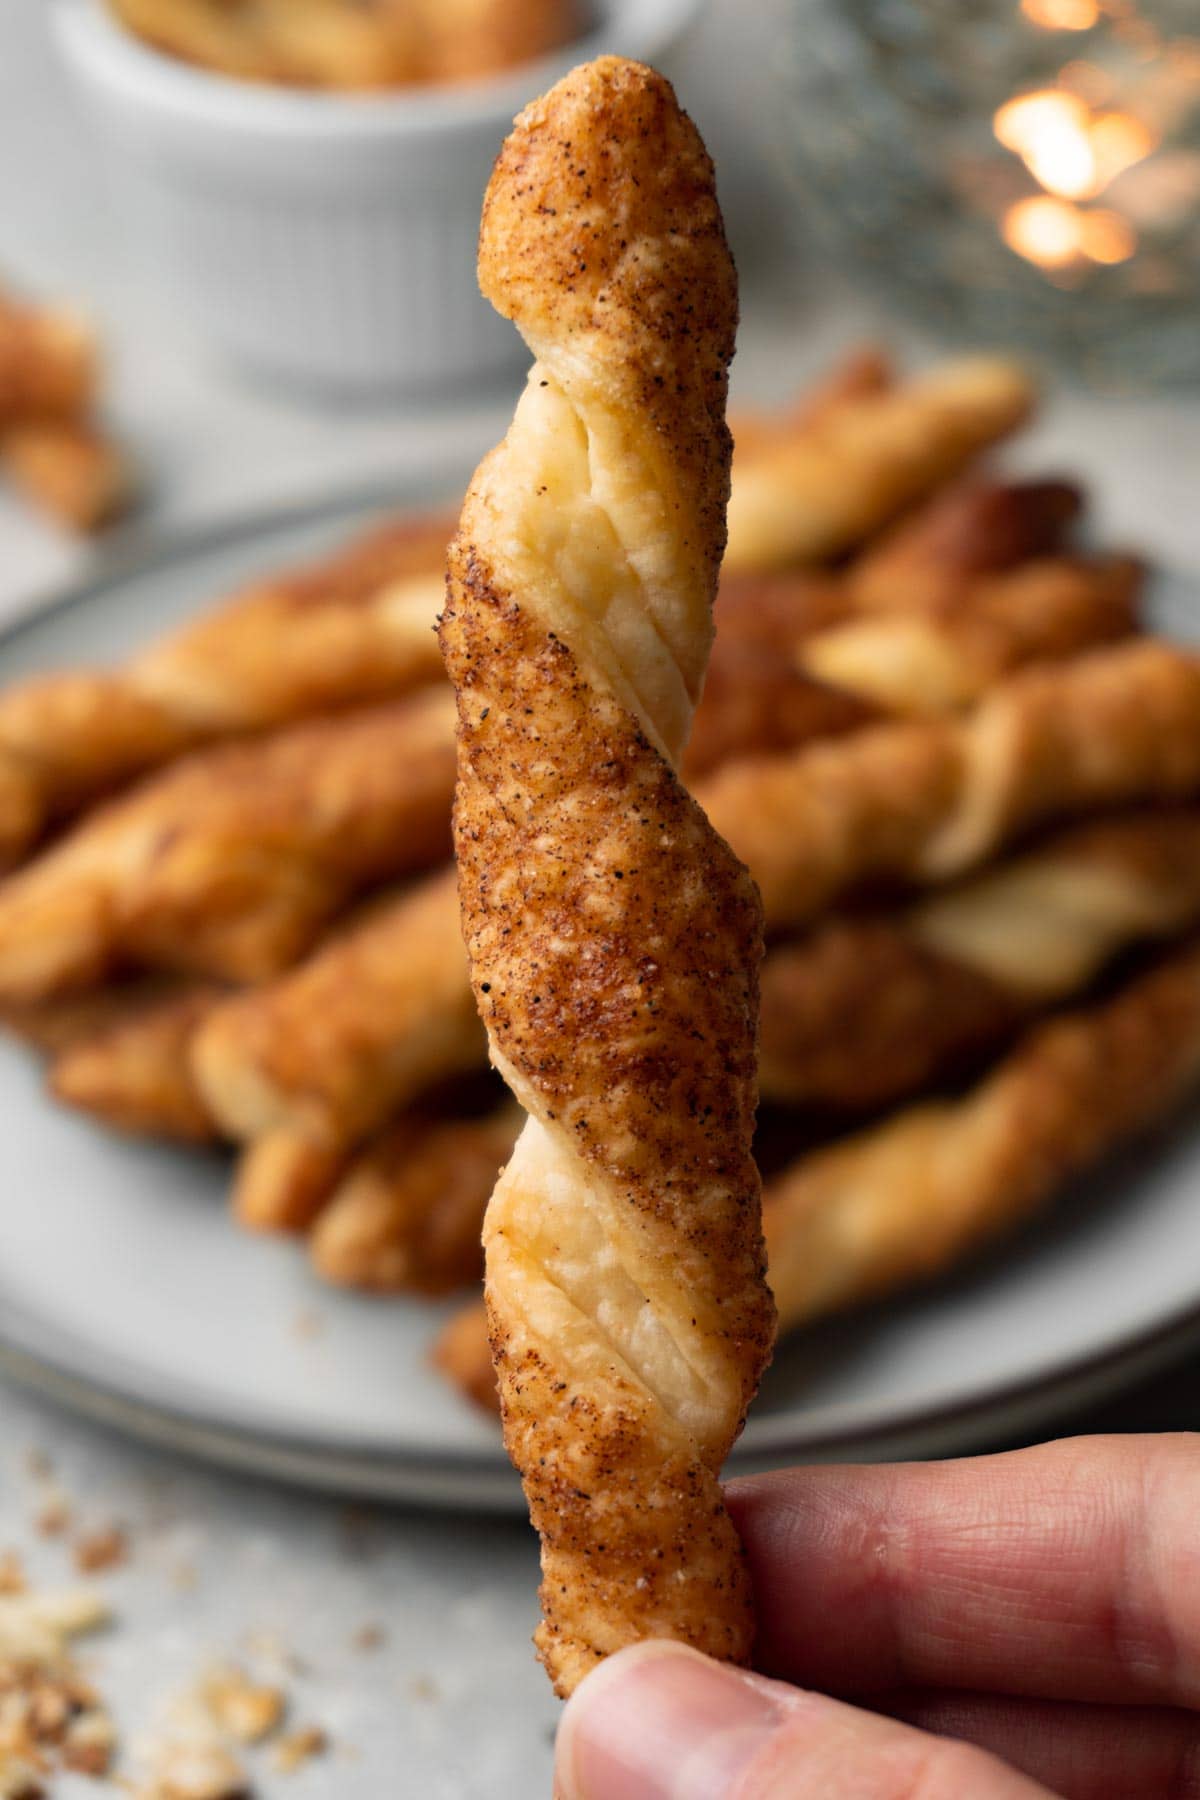 A hand is holding a pastry twist with cinnamon sugar topping. More twists are on the background.